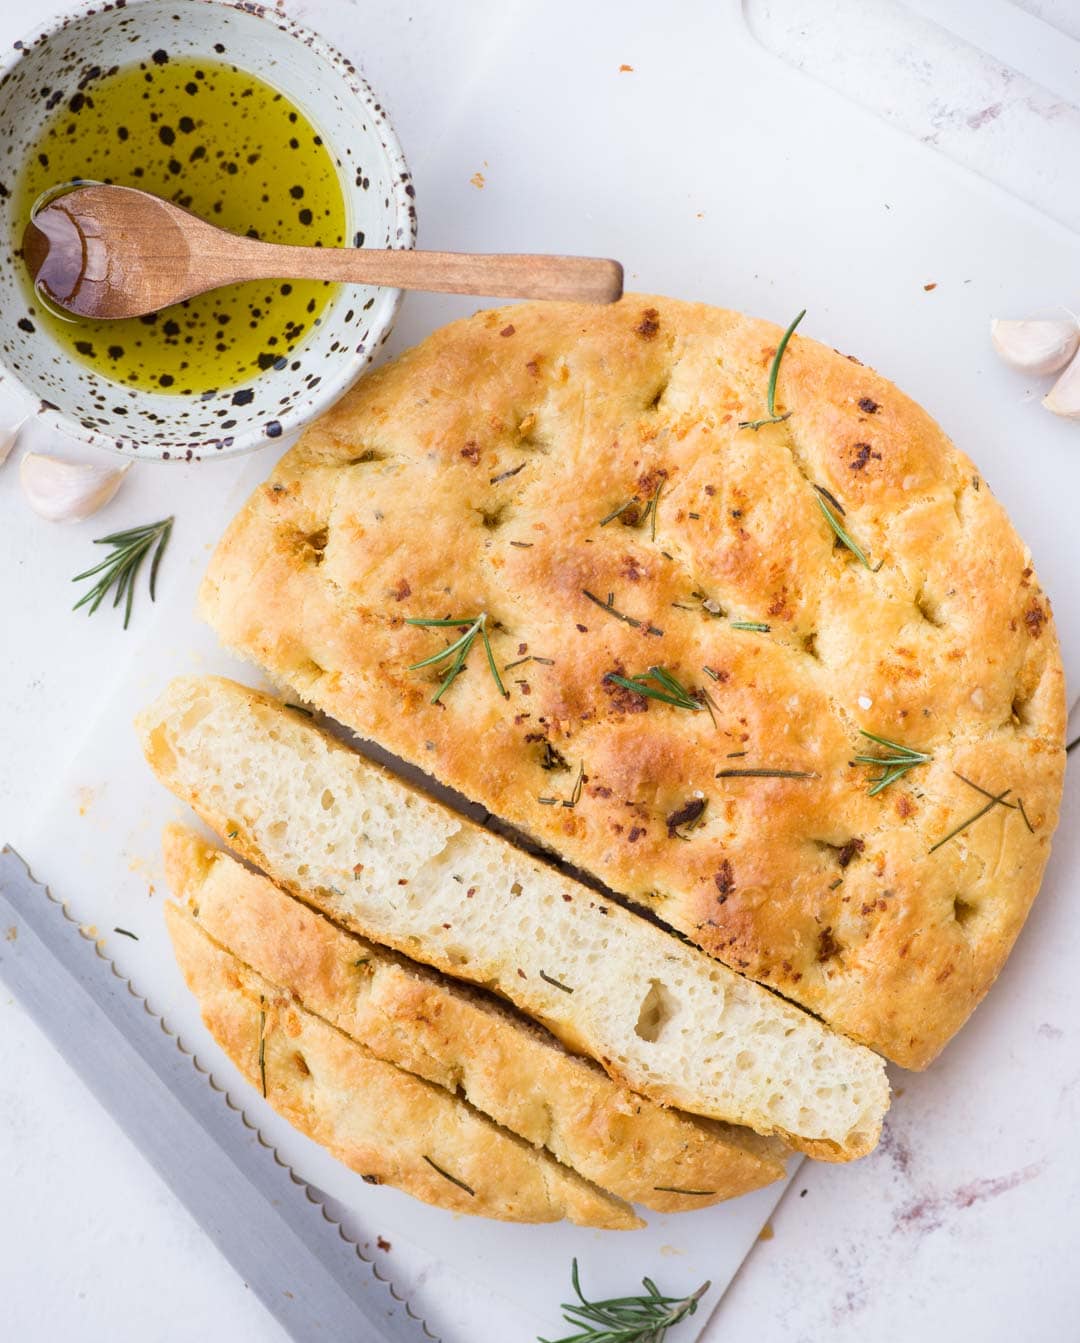 No-knead focaccia bread flavoured with roasted garlic and rosemary. A must-try bread if you are looking for fuss-free, easy, no-knead bread. You can also add olives, sundried tomato and other toppings to it.